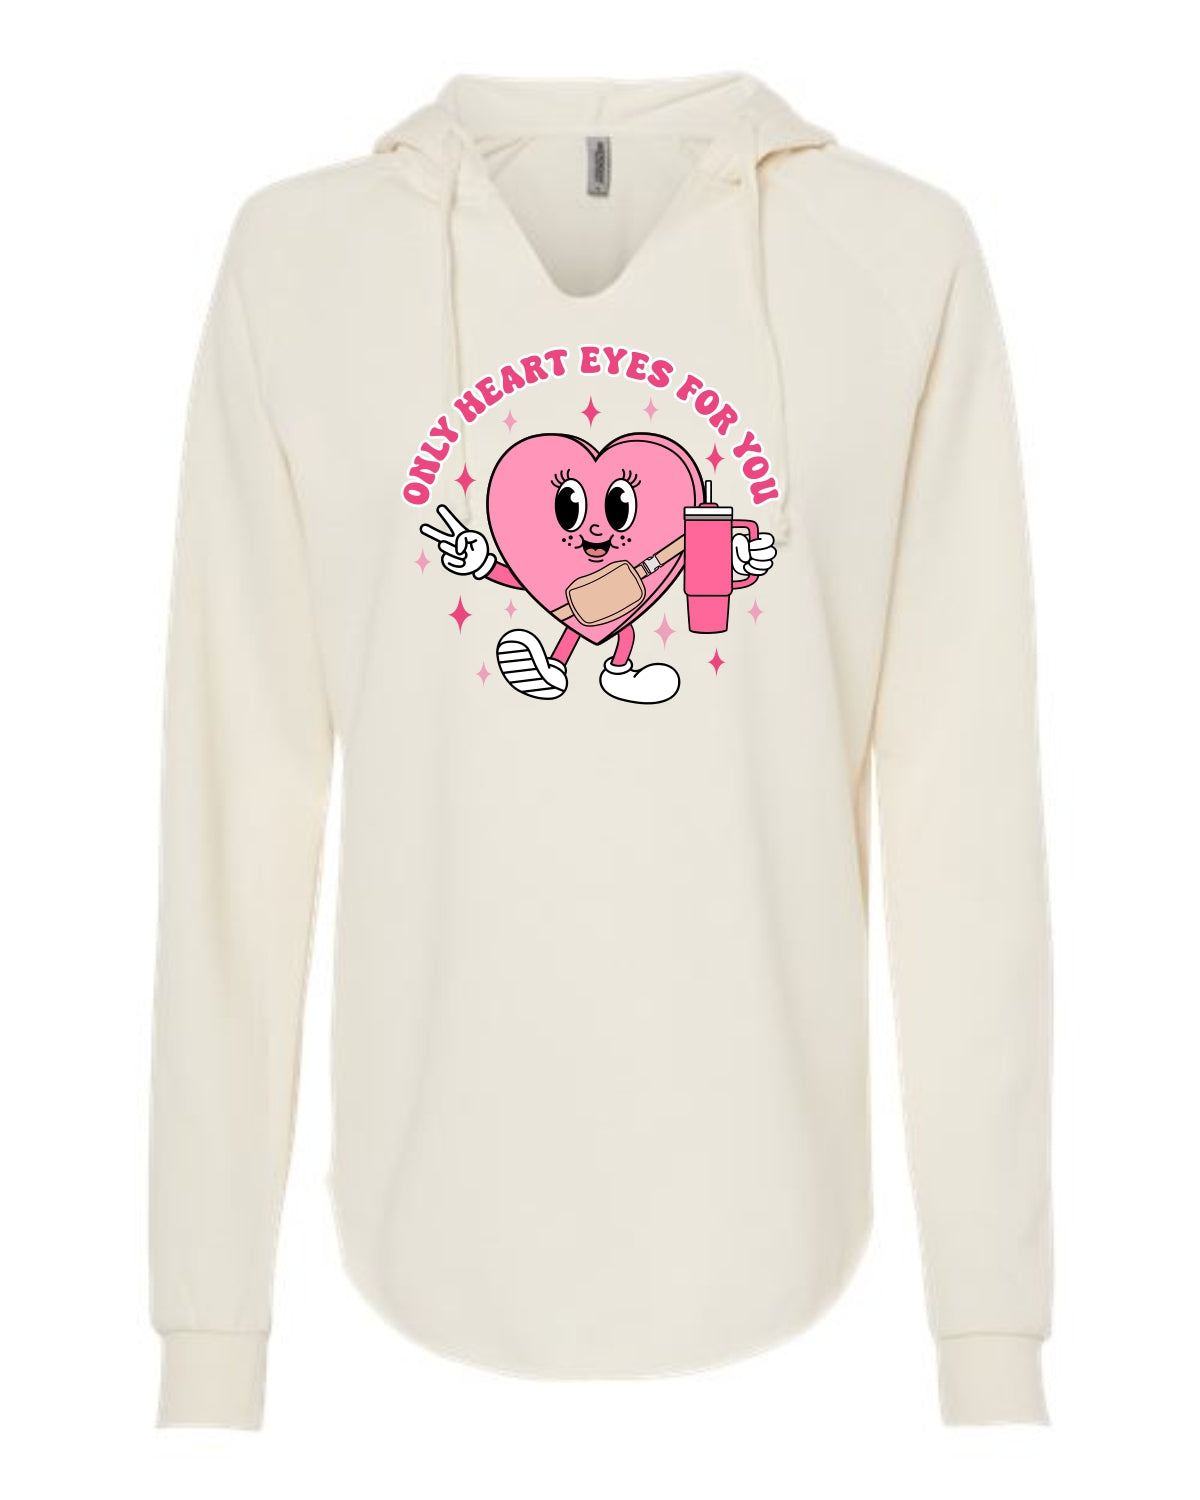 "Heart Eyes Only For You" Ladies' Hoodie